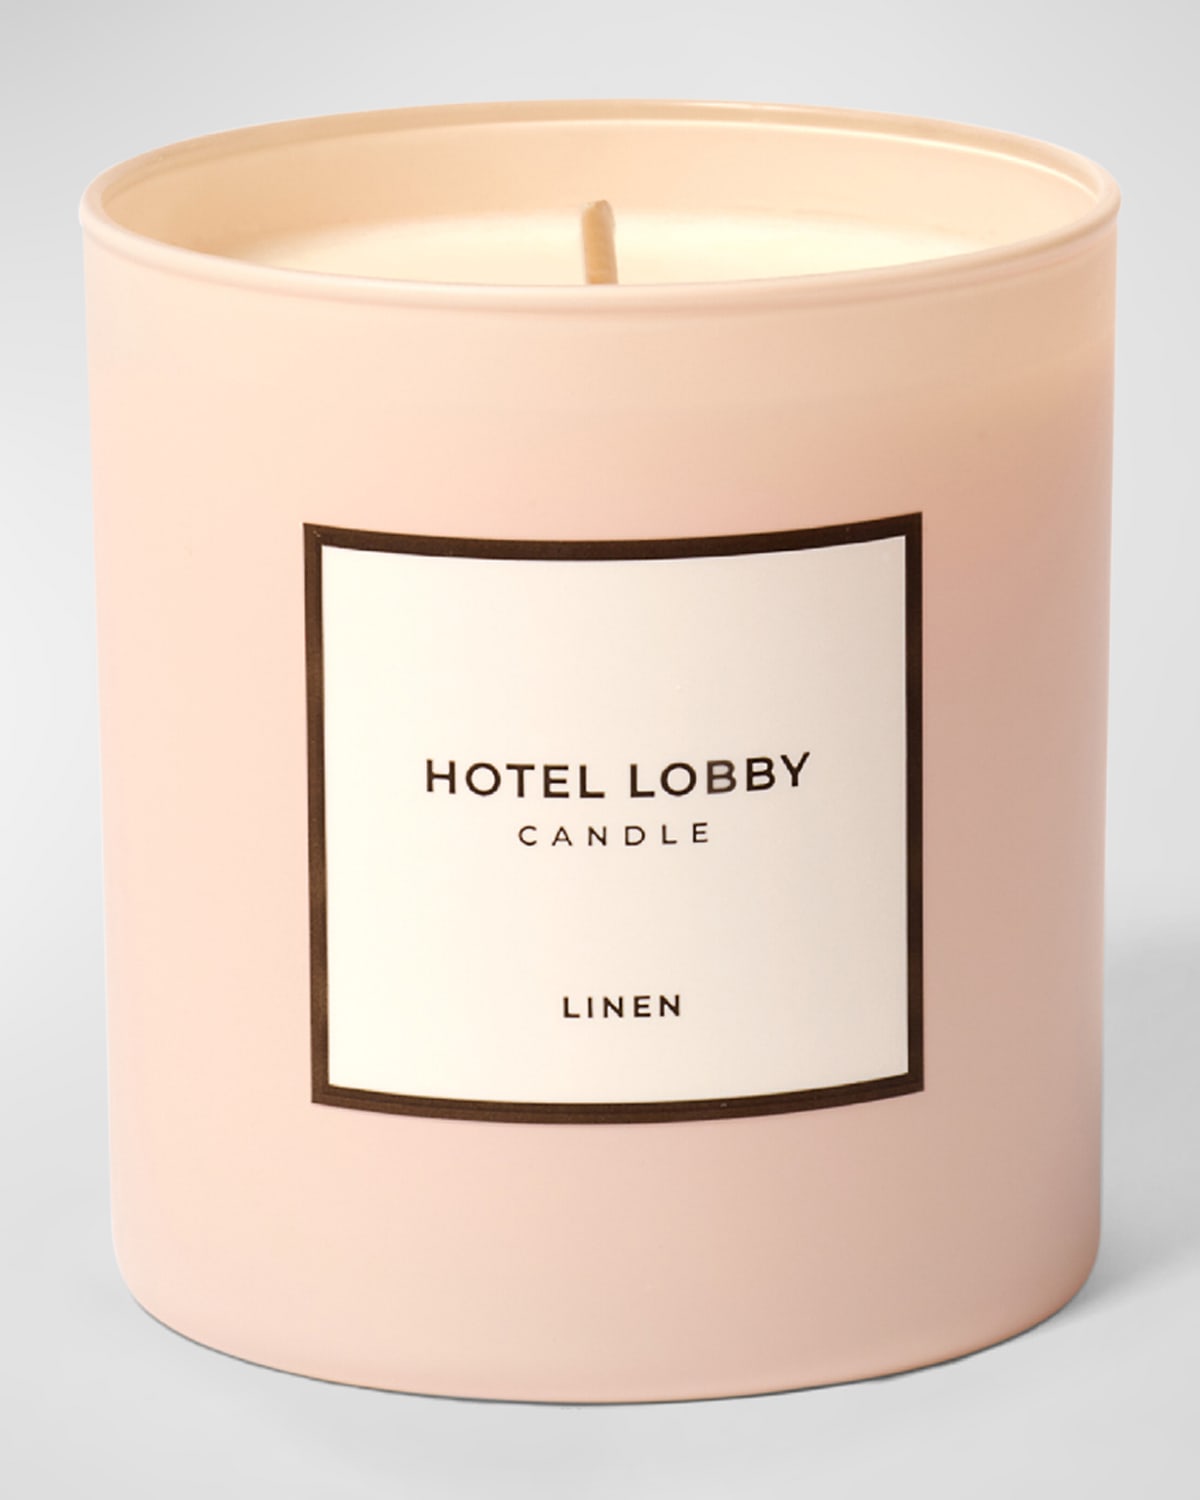 Hotel Lobby Candle 9.75 Oz. Core Collection Linen Scented Candle